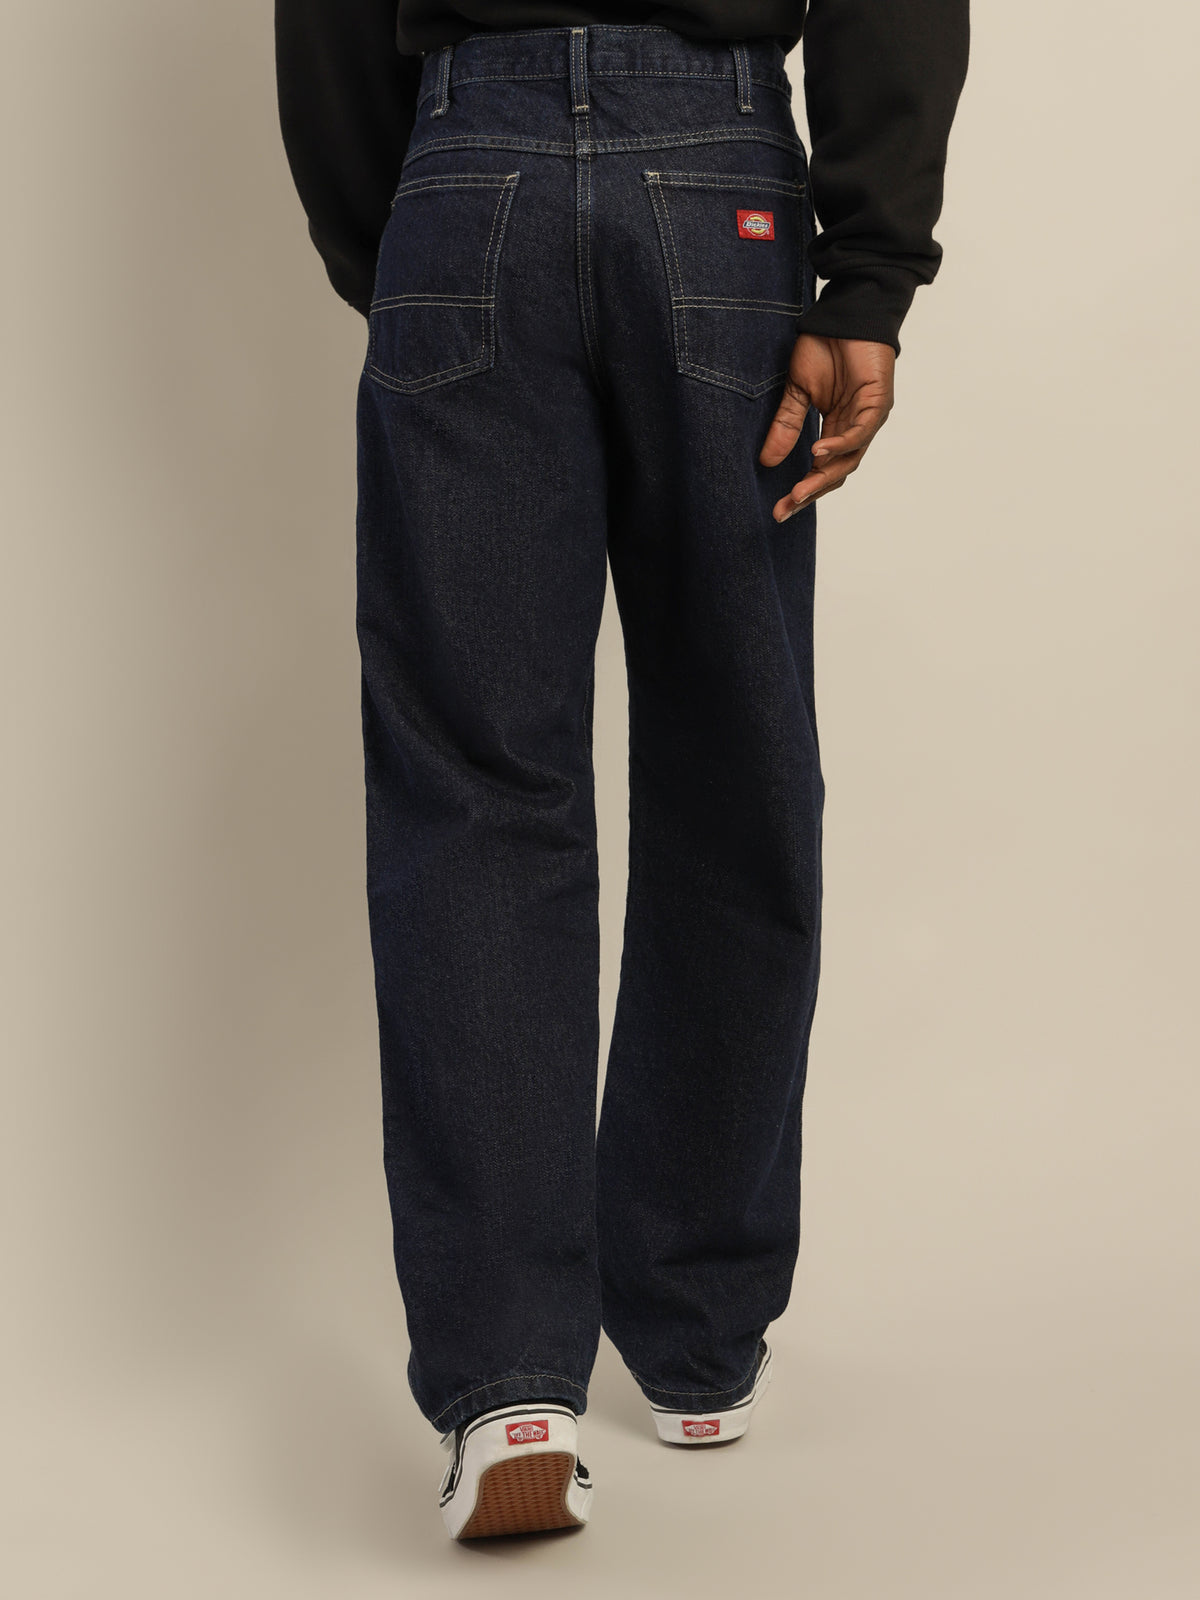 Relaxed Straight Jeans in Stonewashed Indigo Blue